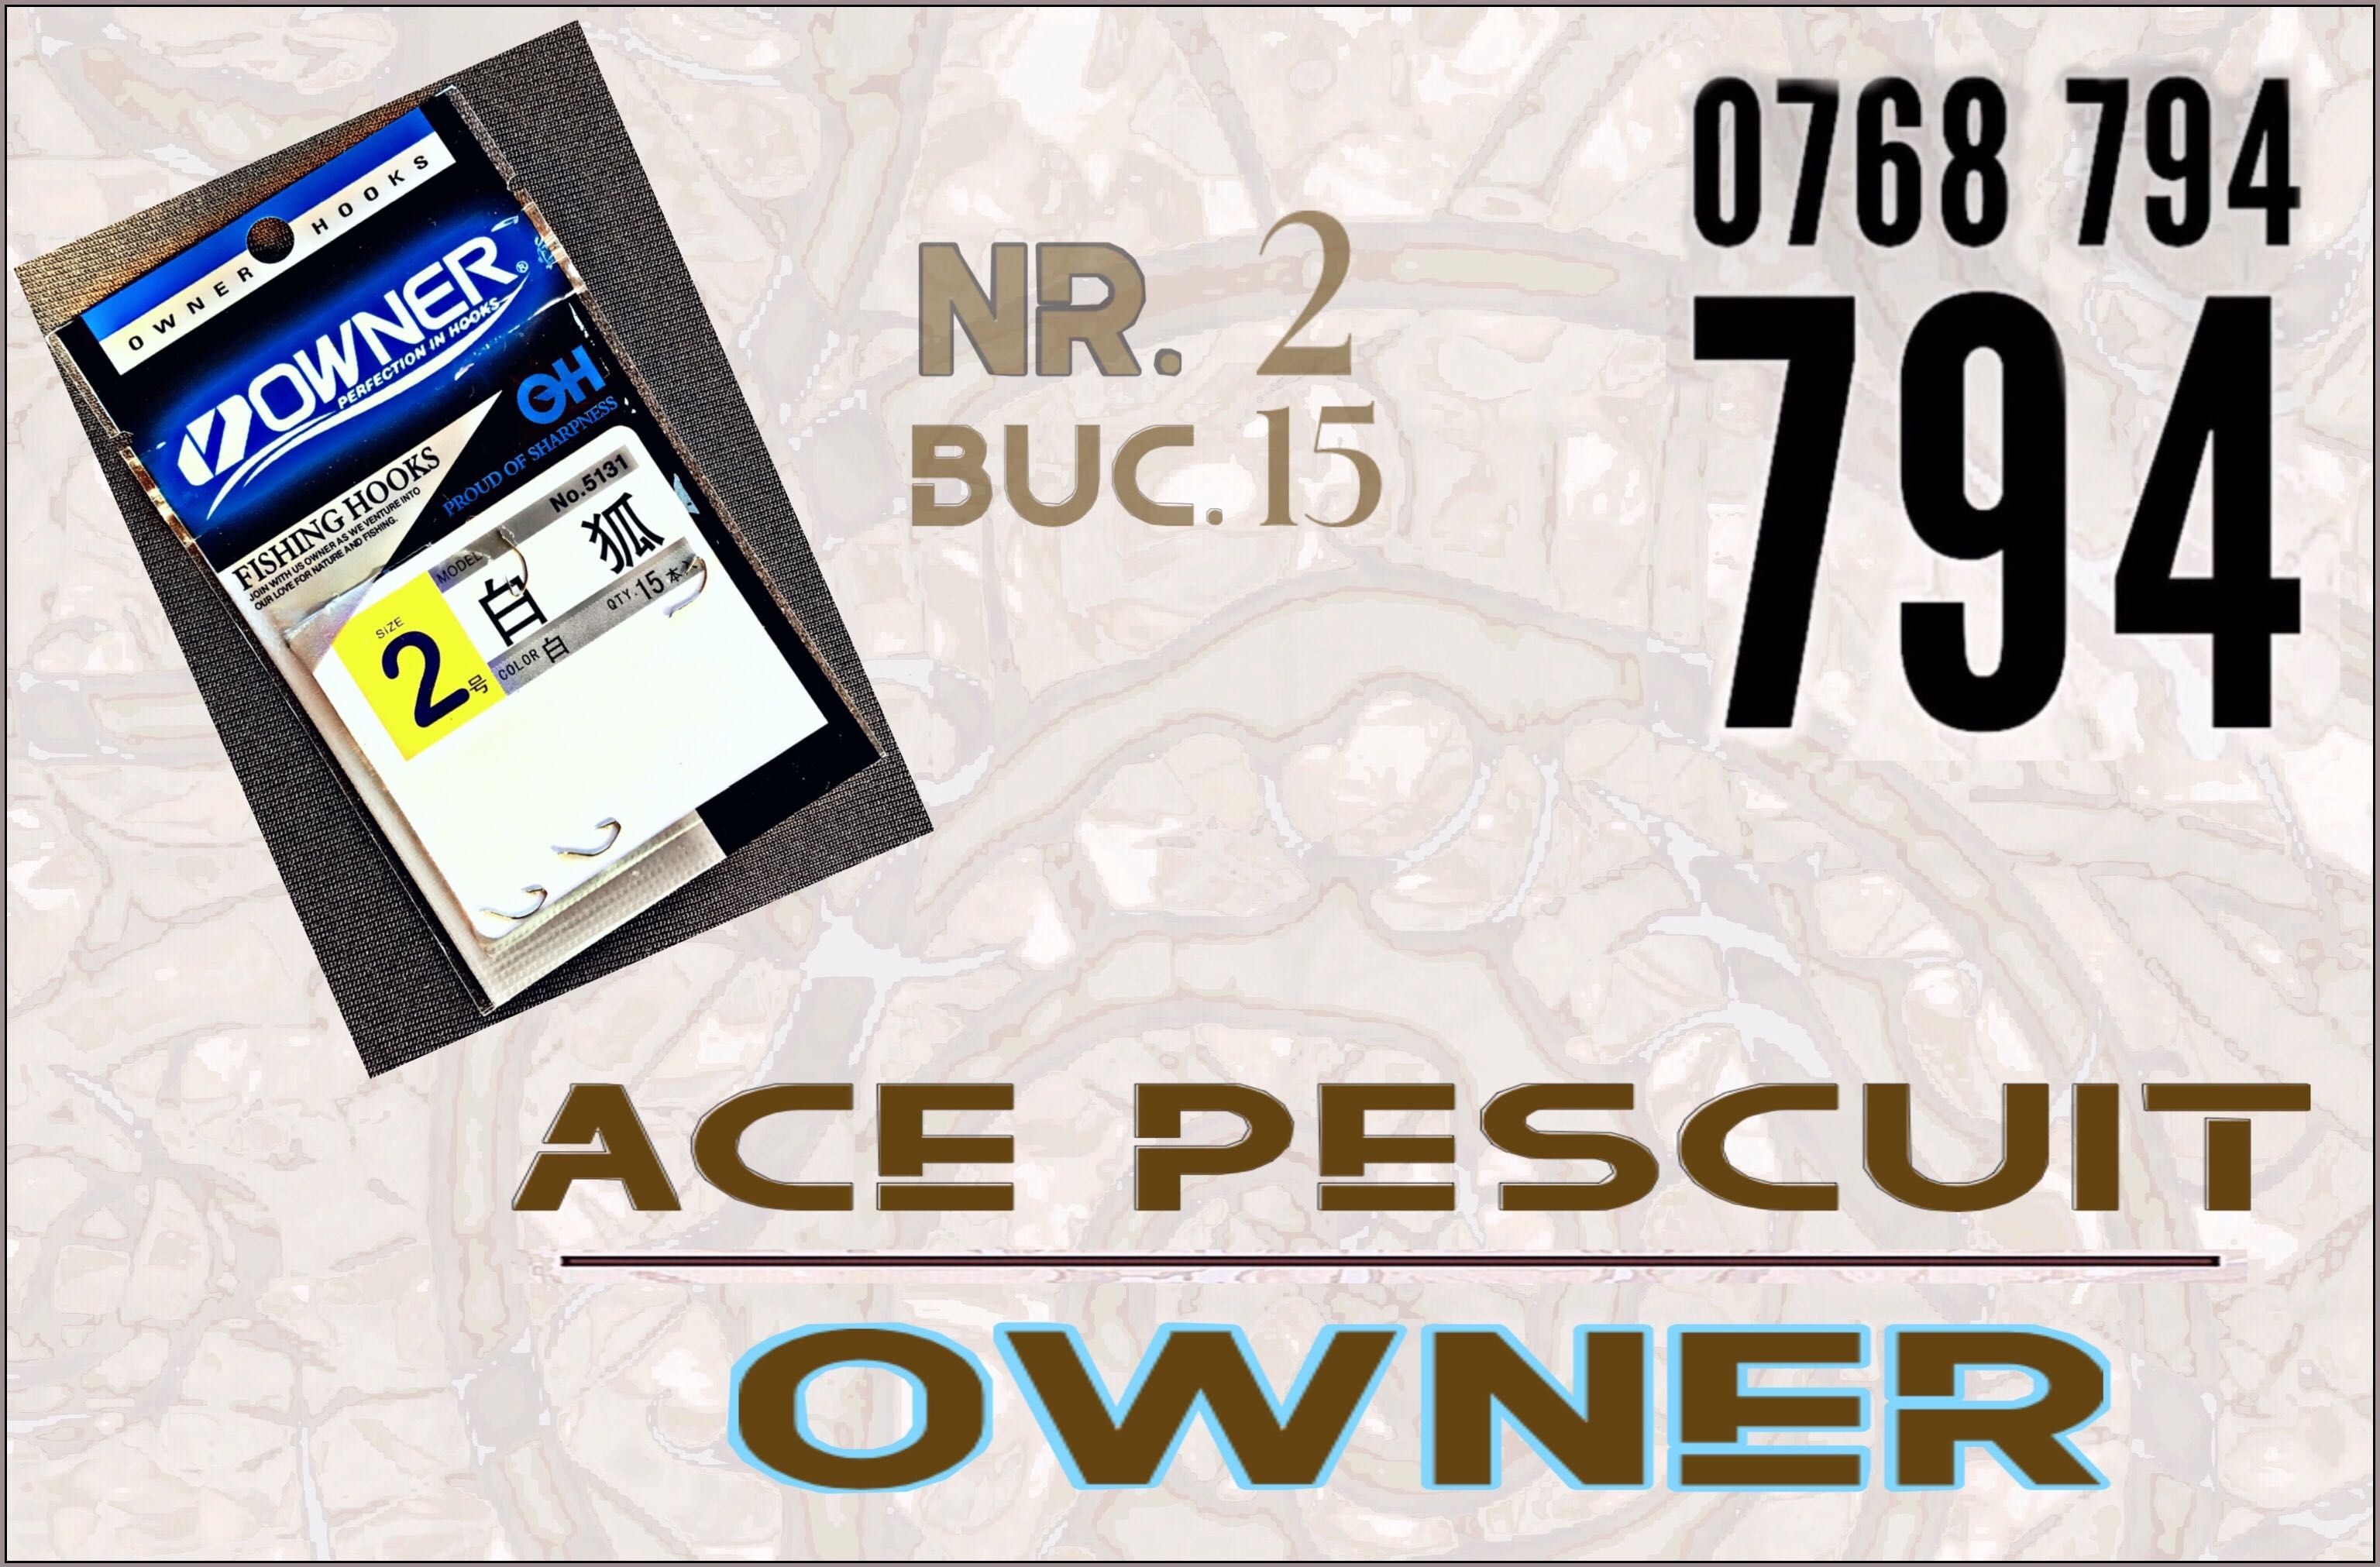 Ace pescuit Owner